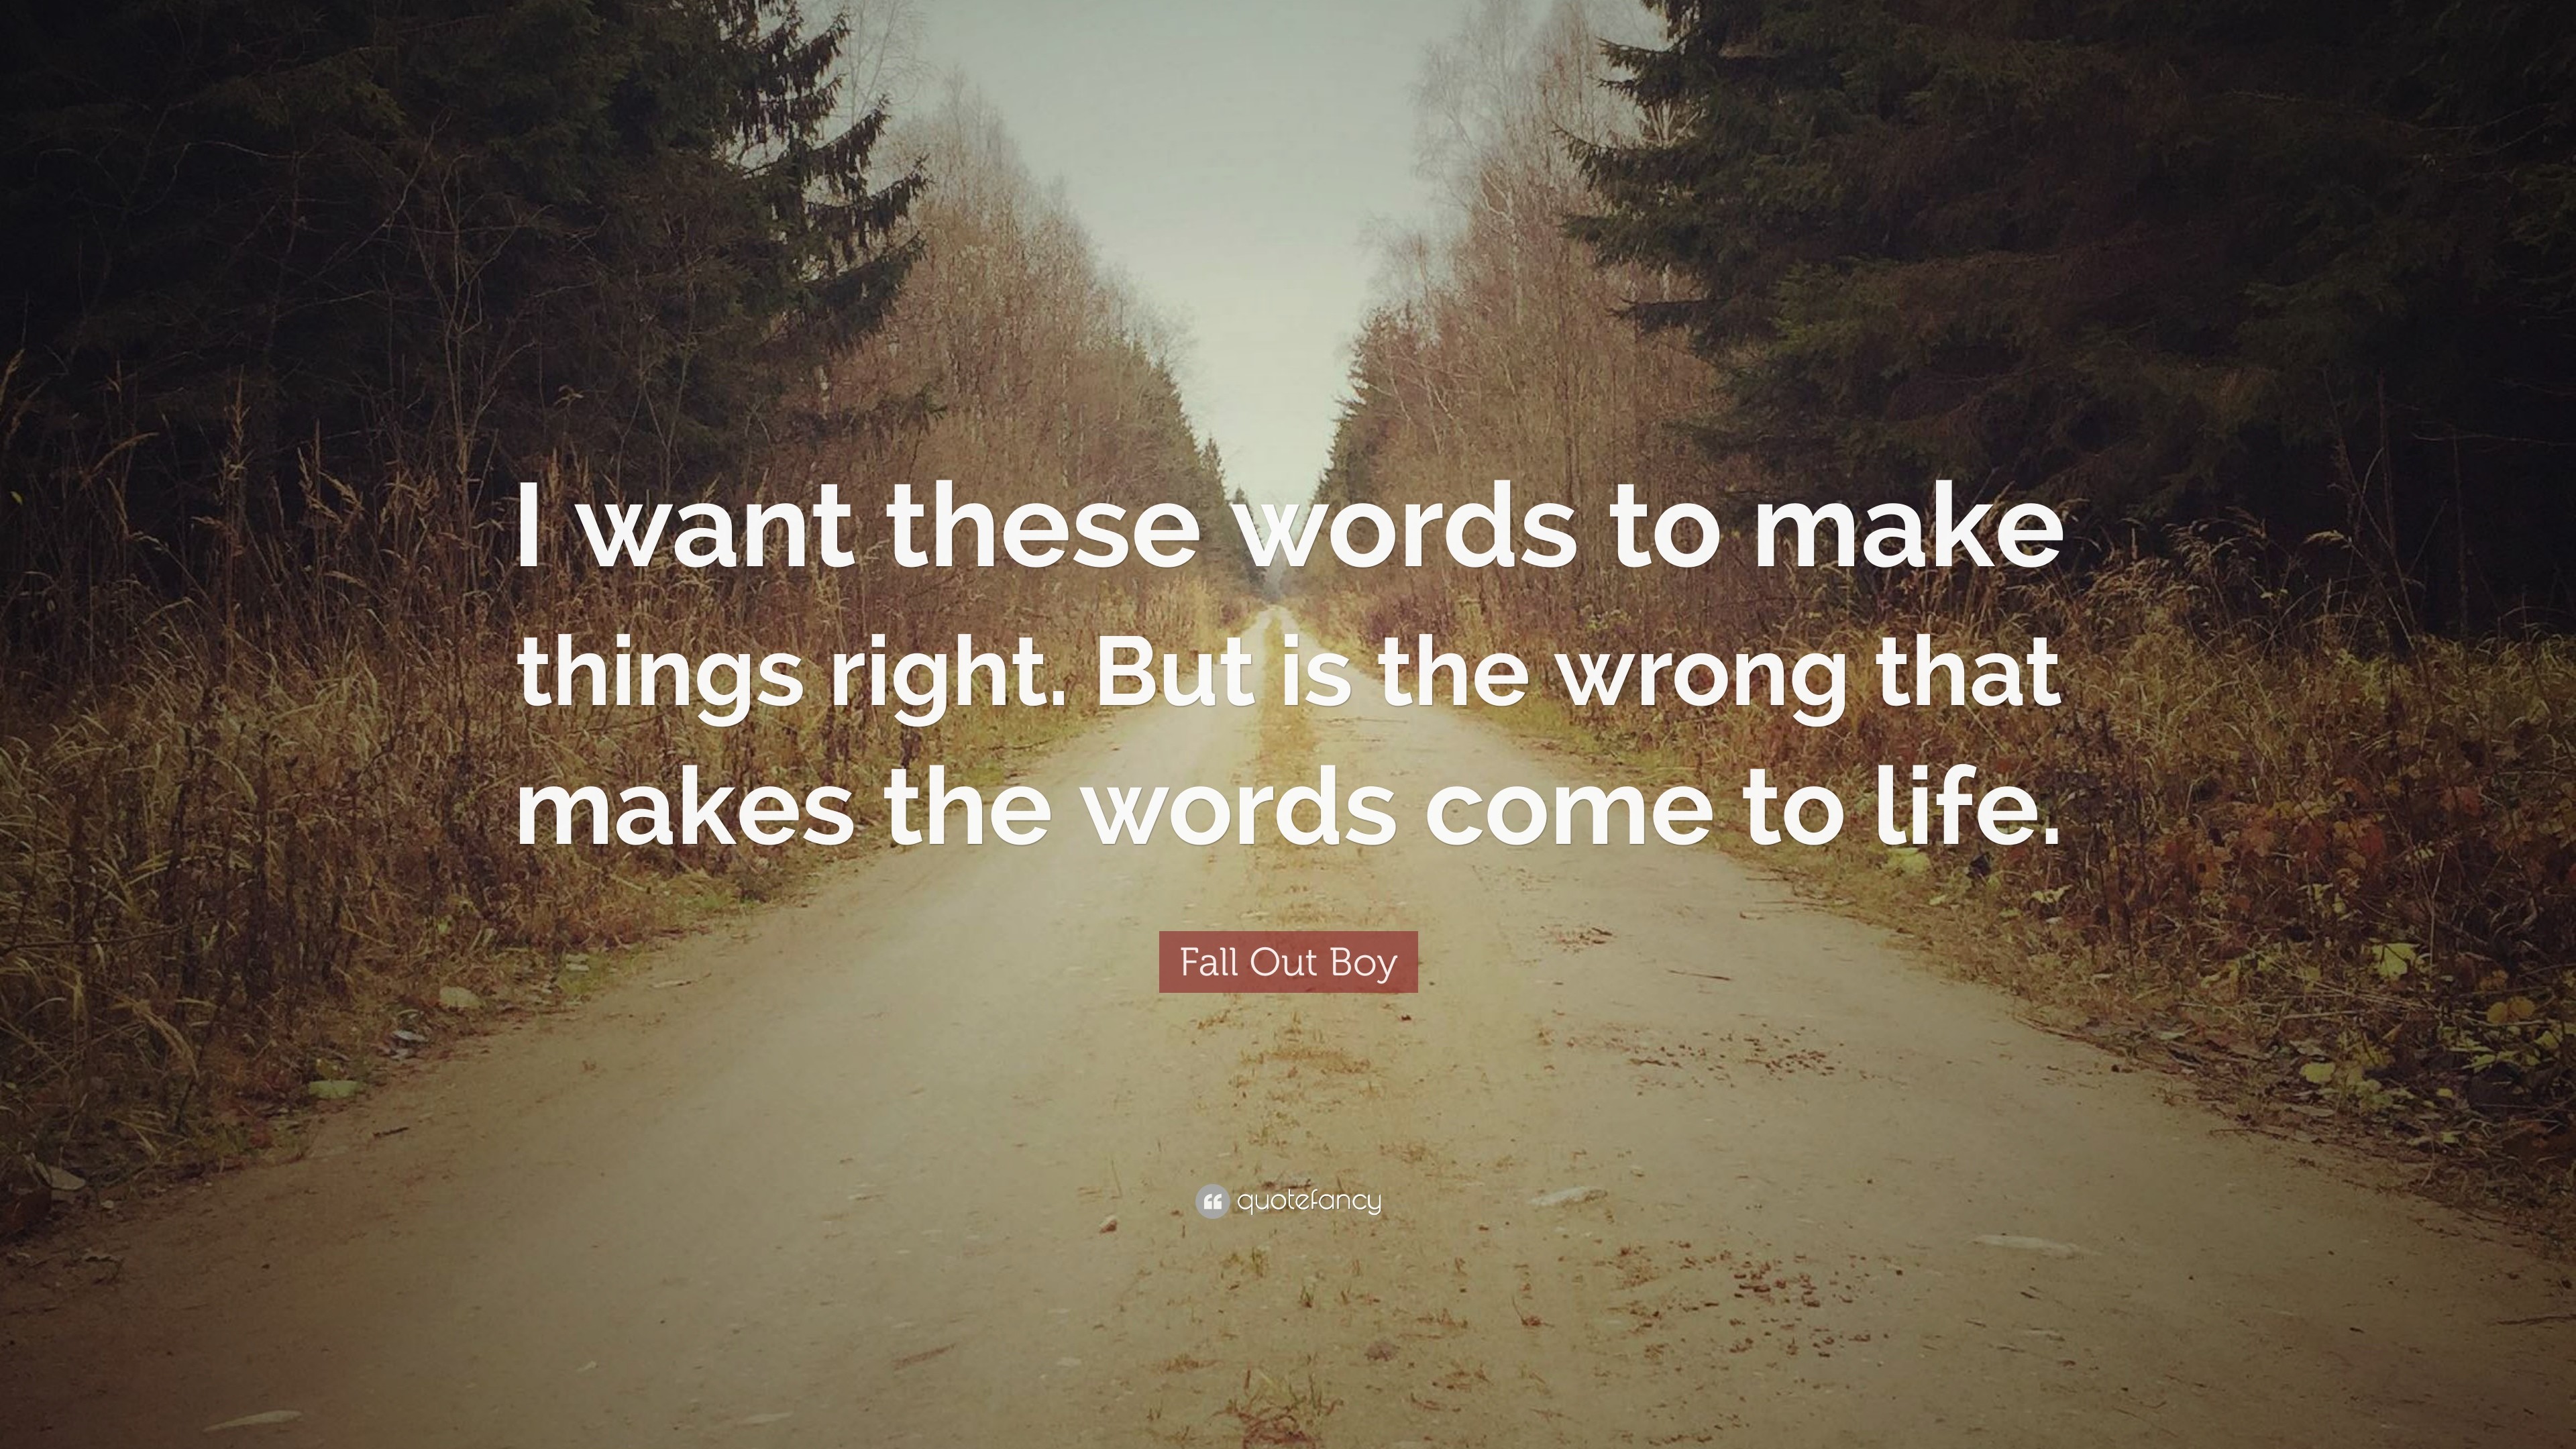 3840x2160 Fall Out Boy Quote: “I want these words to make things right. But